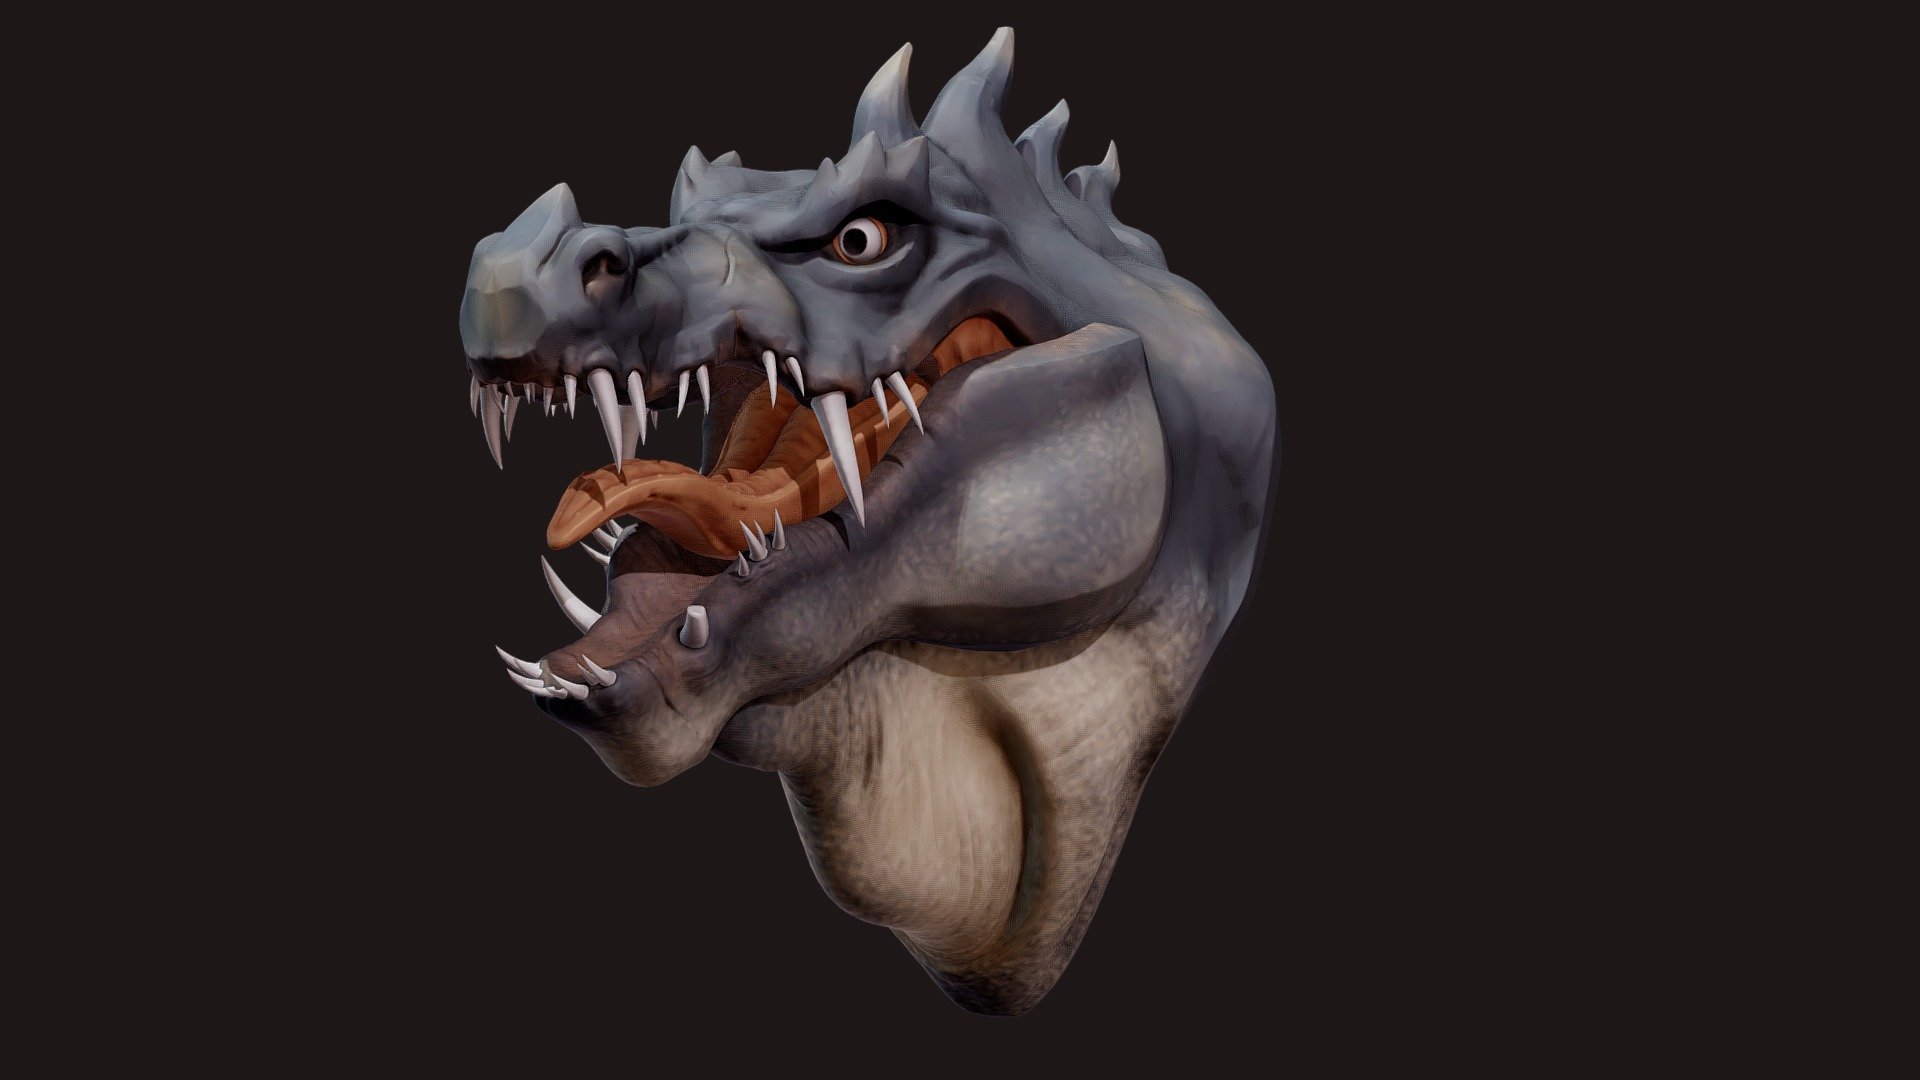 I wanted to give him personality and I am happy with the result.
I may add the body later, but for now i will focus on the head. 
Still need to detail him, texture properly and retopo.
Any critiques are welcome! - Dragon bust - Wip - 3D model by Sonia Mendoza (@sonia.zagan) 3d model